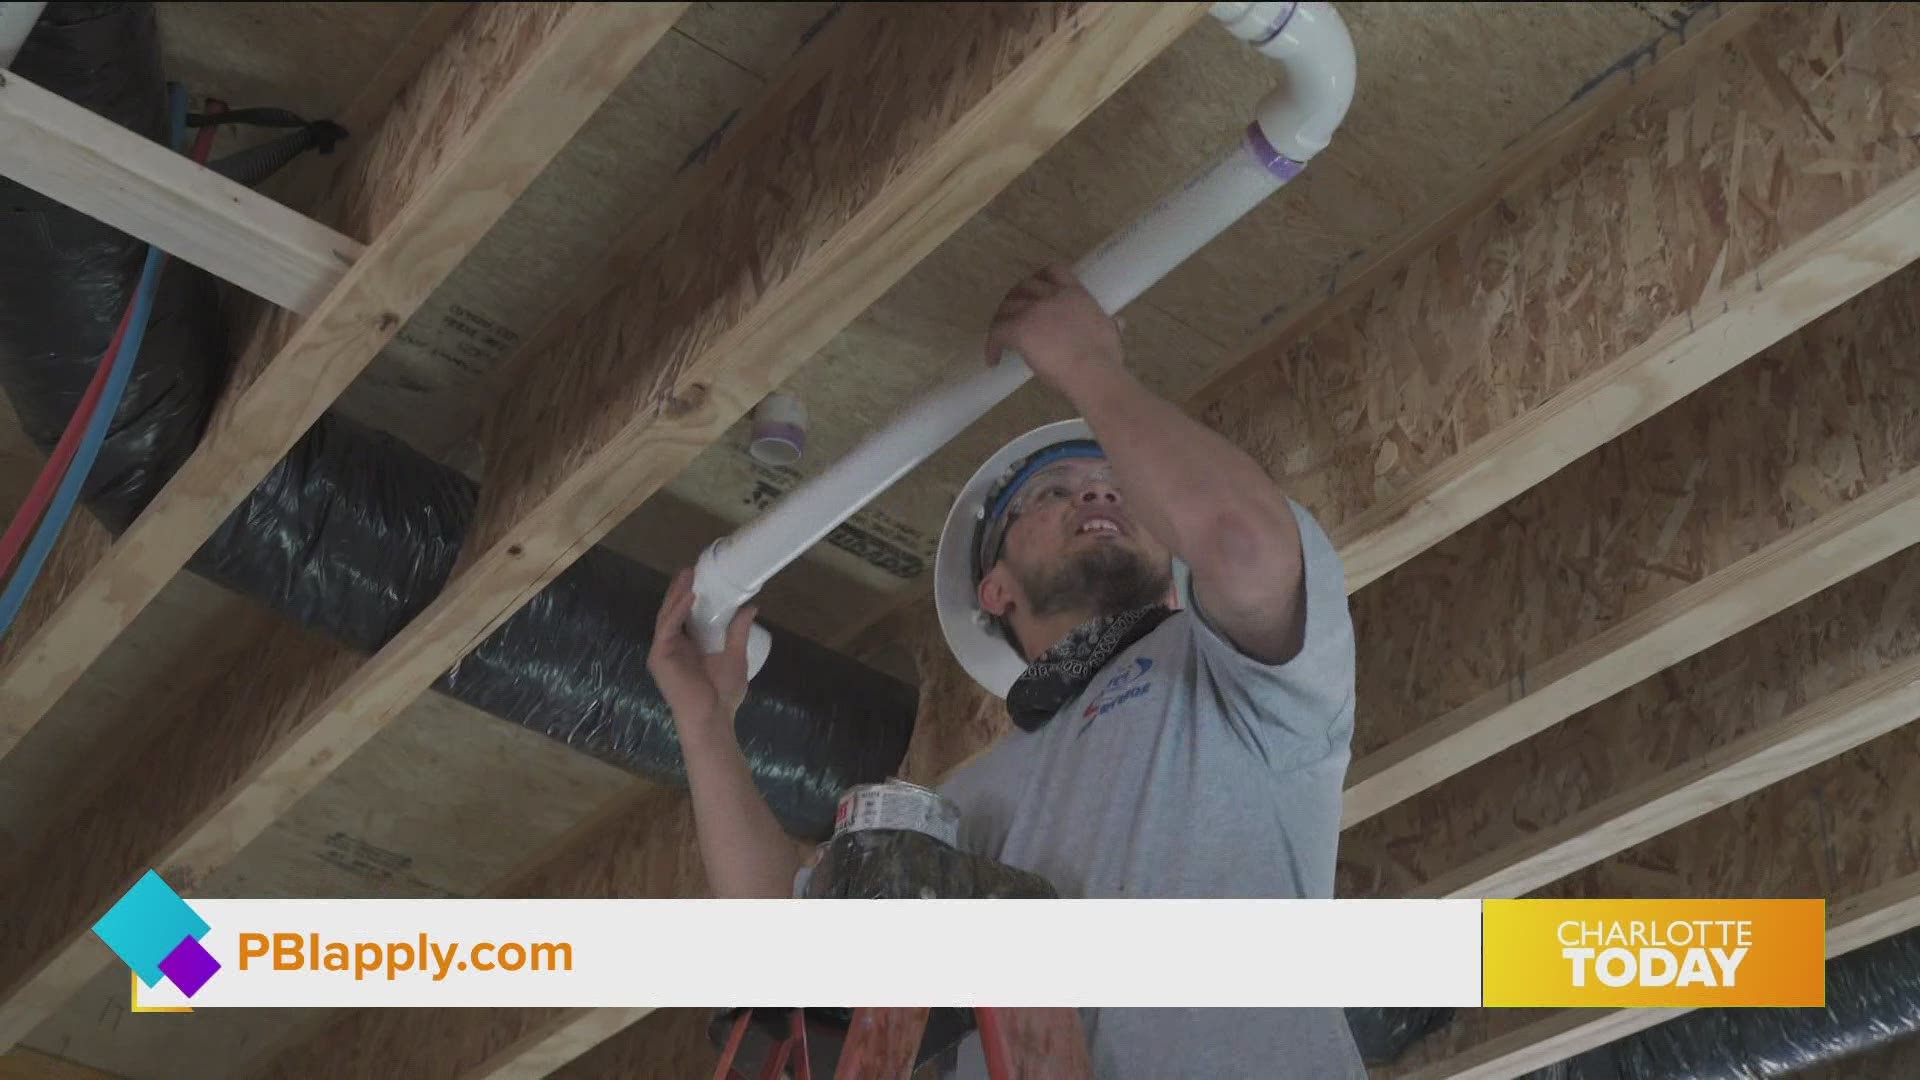 Price Brothers is looking for plumbers to work in new construction